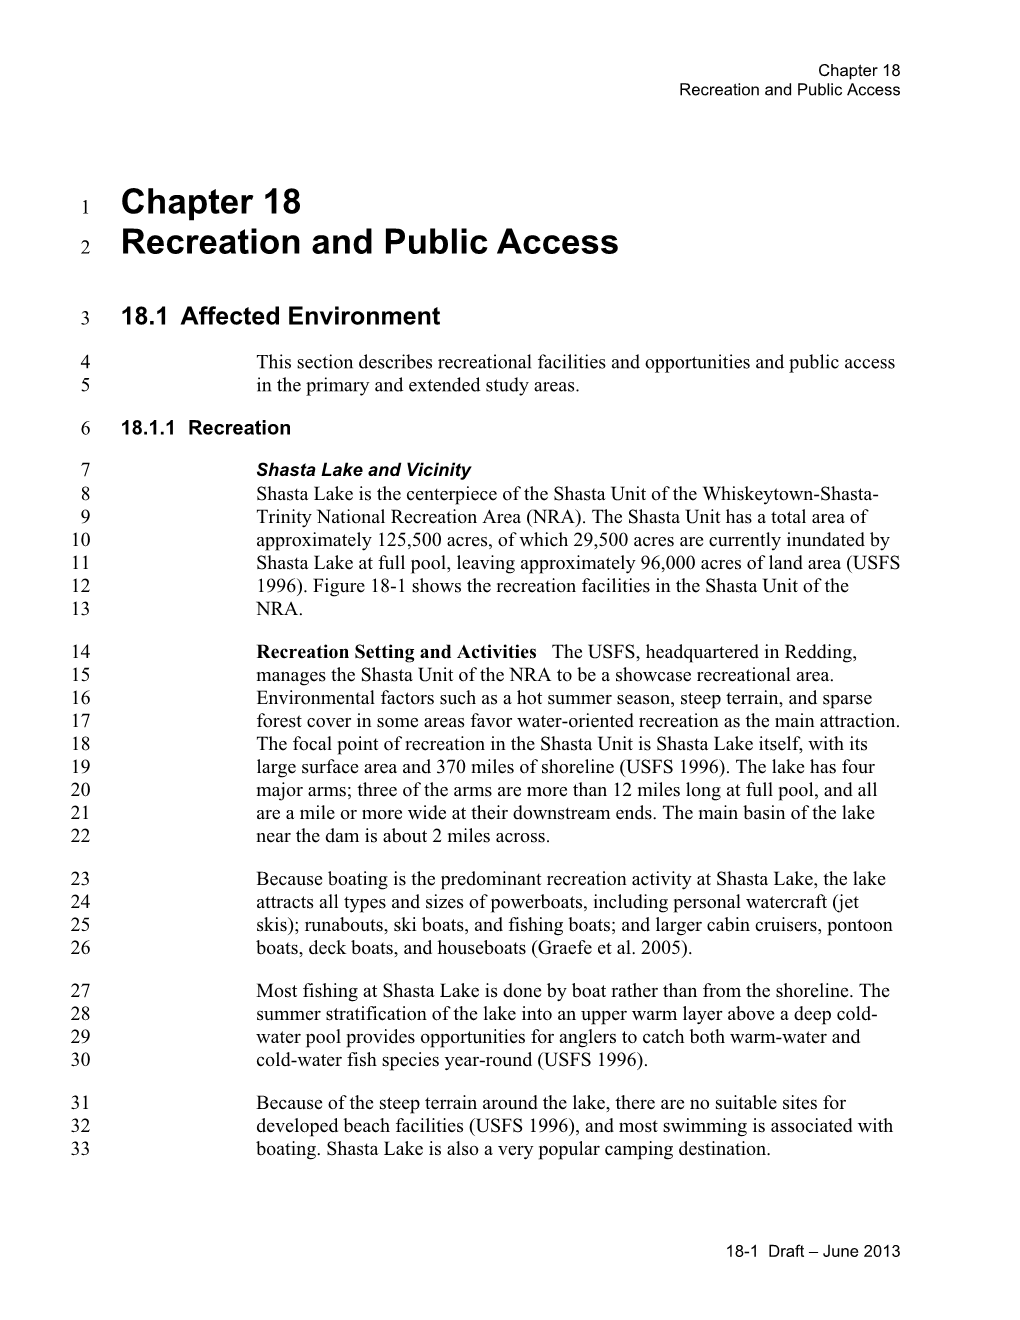 Chapter 18 Recreation and Public Access